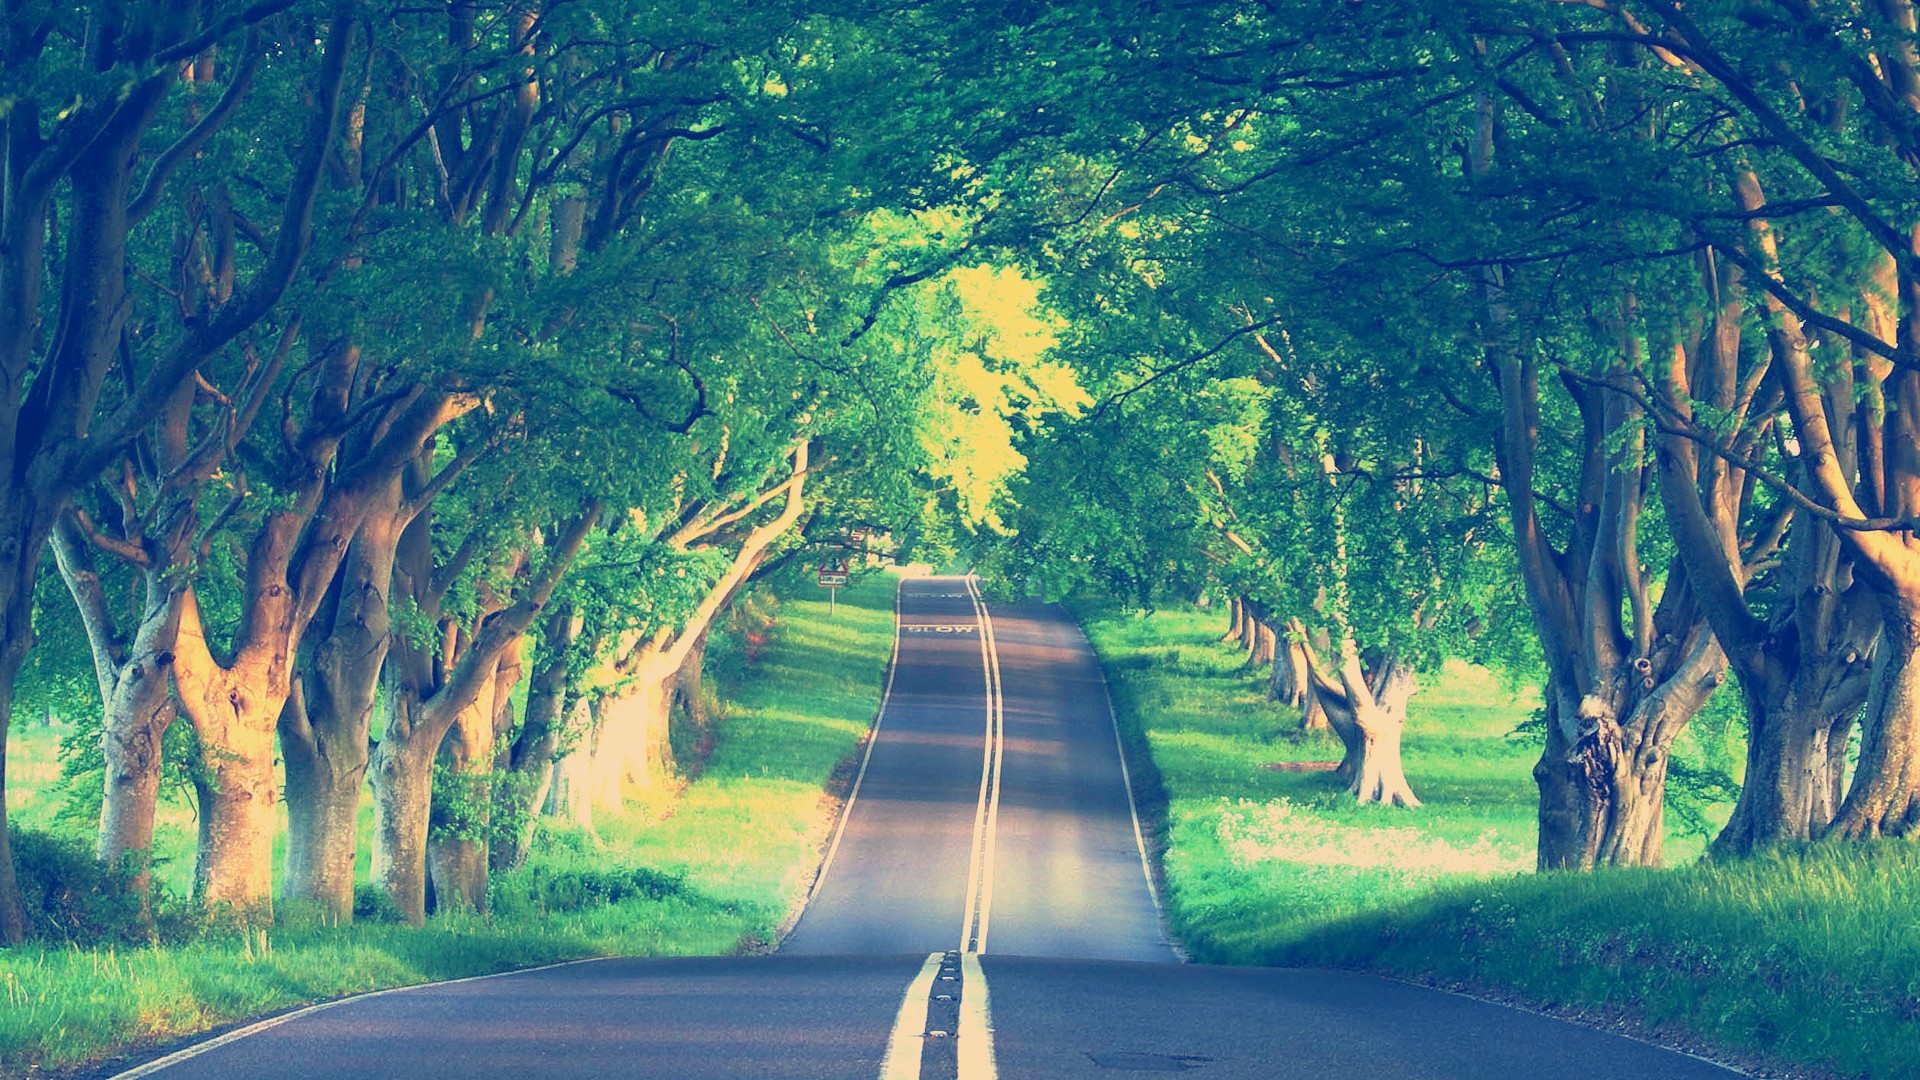 Wallpapers Nature Country Pin Road Scenery Hq For Pc On Pinterest ...